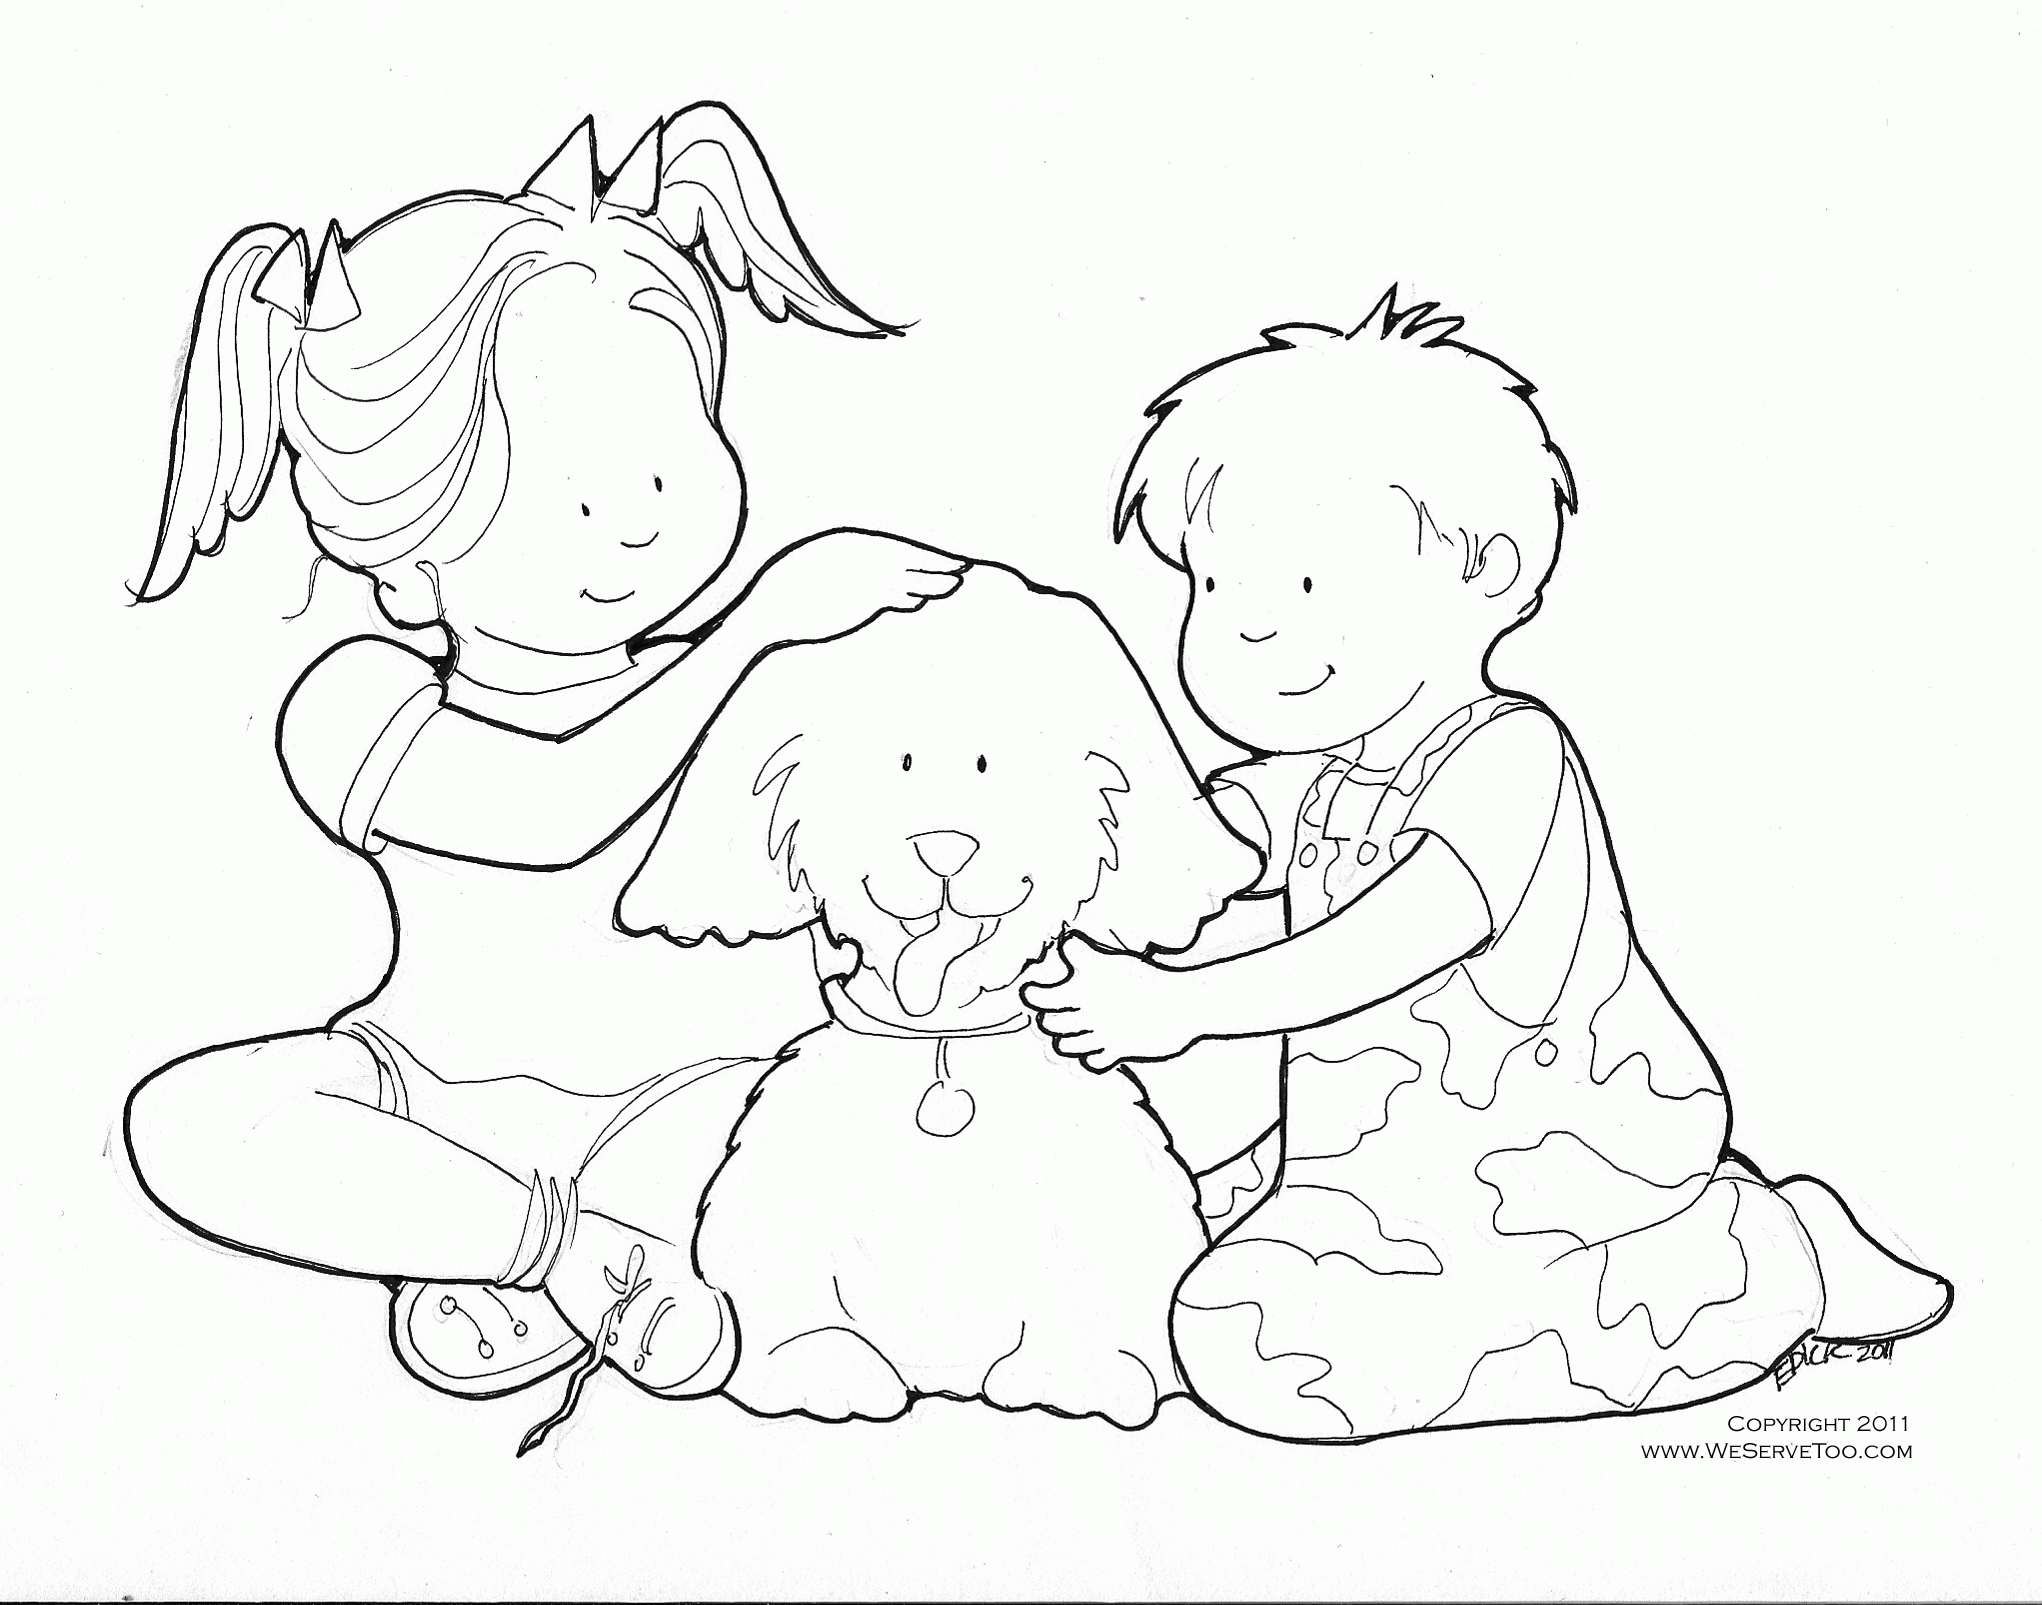 Free Kids Helping Each Other Coloring Page, Download Free Clip Art, Free  Clip Art on Clipart Library